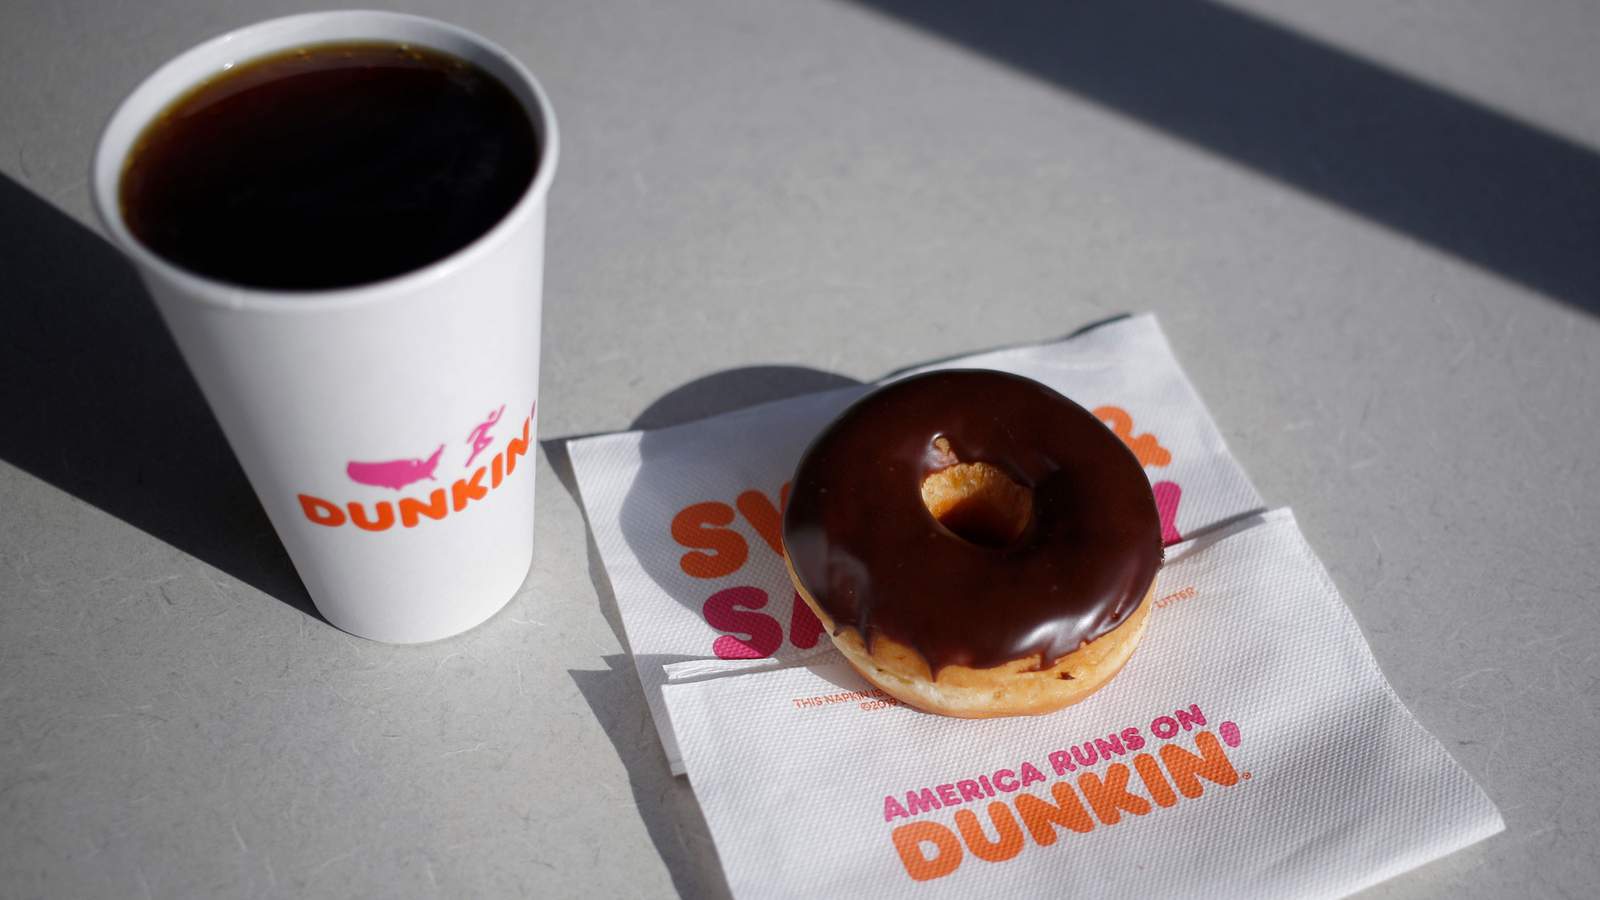 Dunkin’ Donuts is offering free coffee and donuts on select days in August